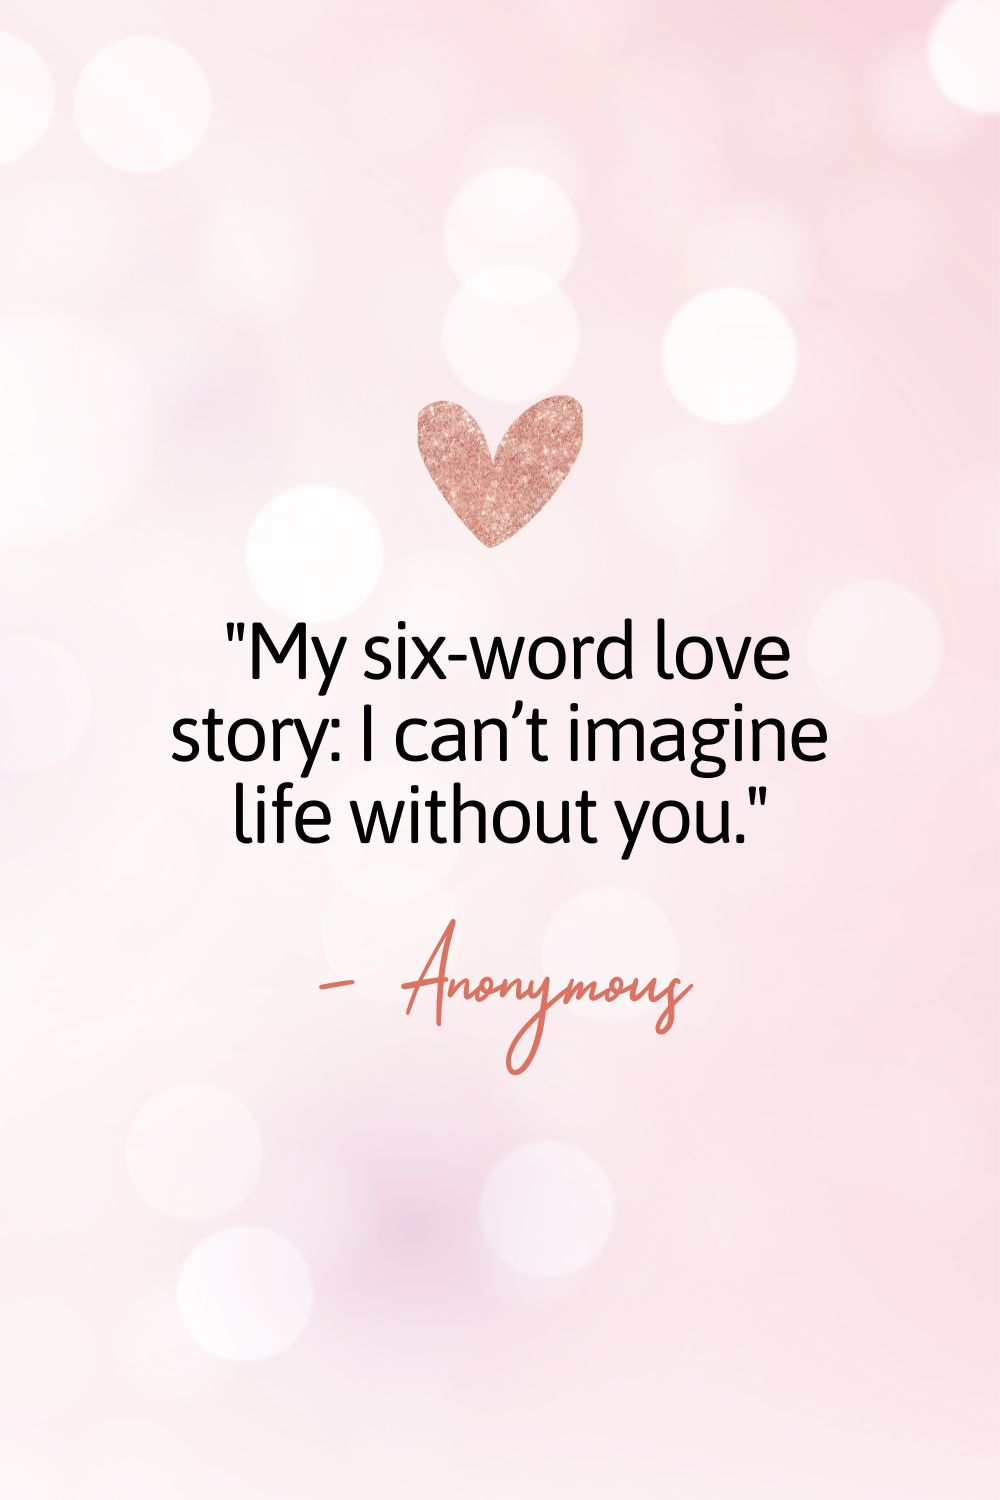 My six-word love story: I can’t imagine life without you